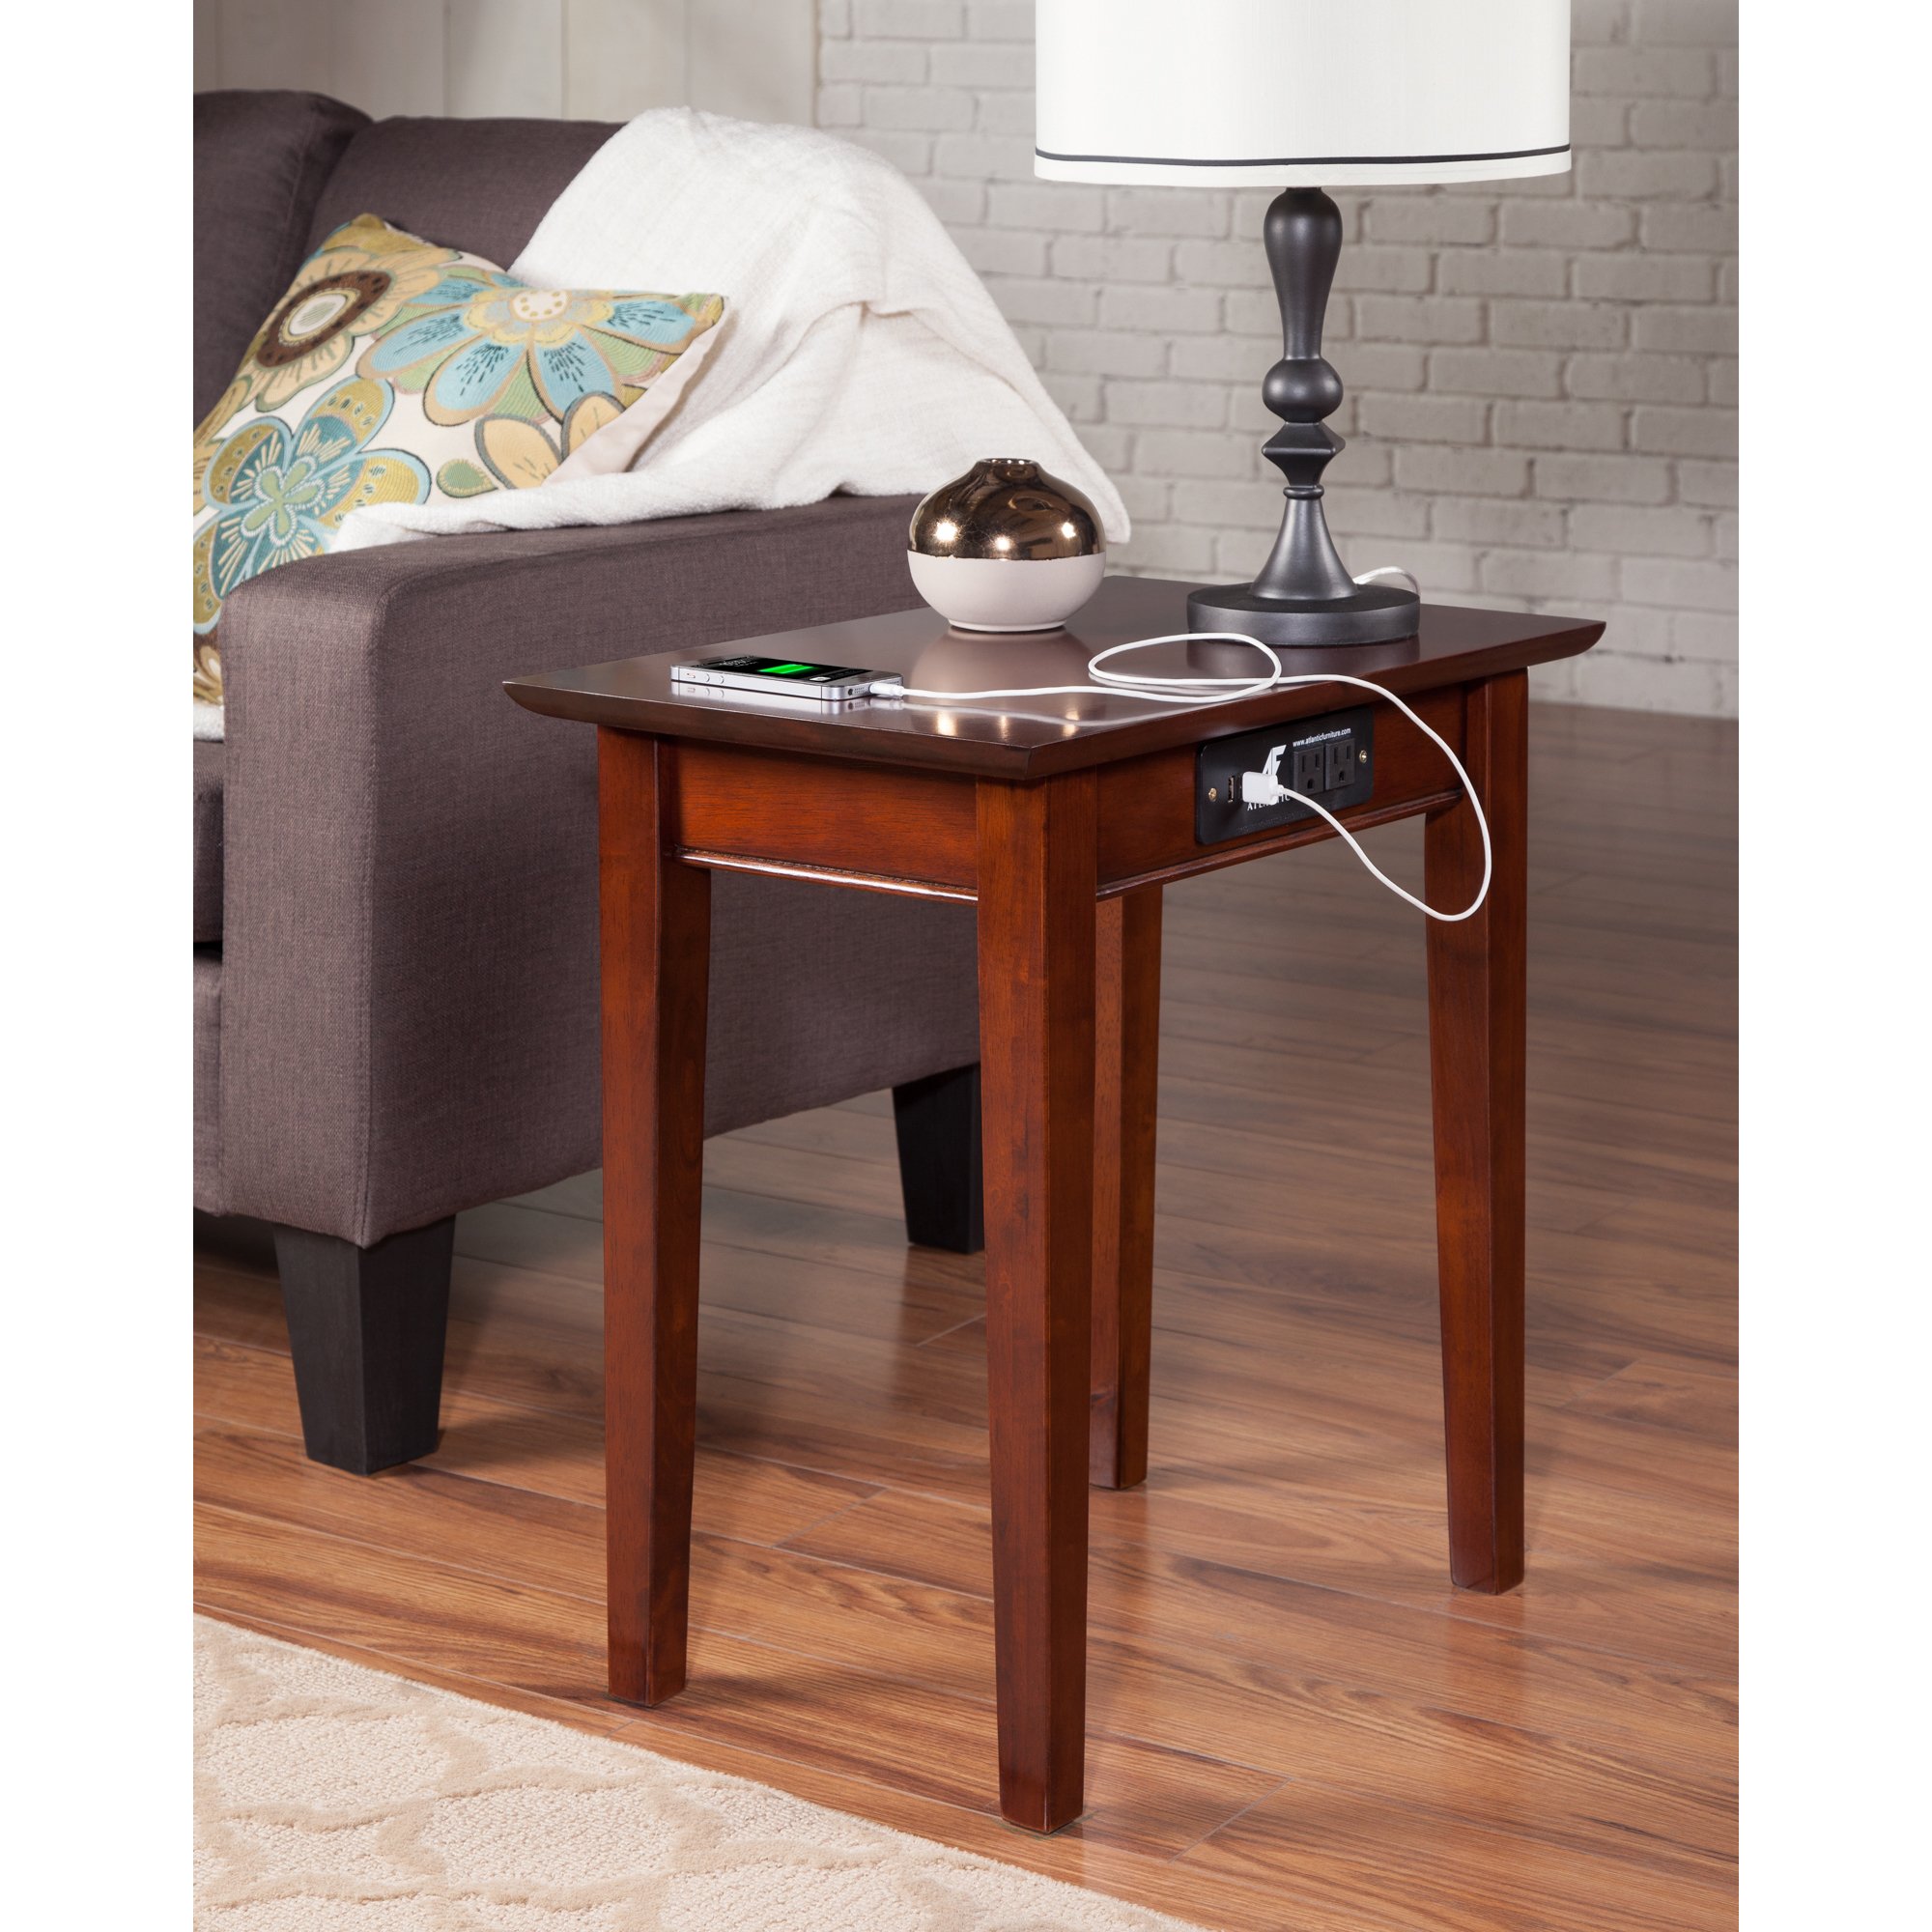 shaker usb power walnut wood side table free shipping chair with charger accent universal patio furniture inch high end tables centrepiece plans coastal furnishings gold and white